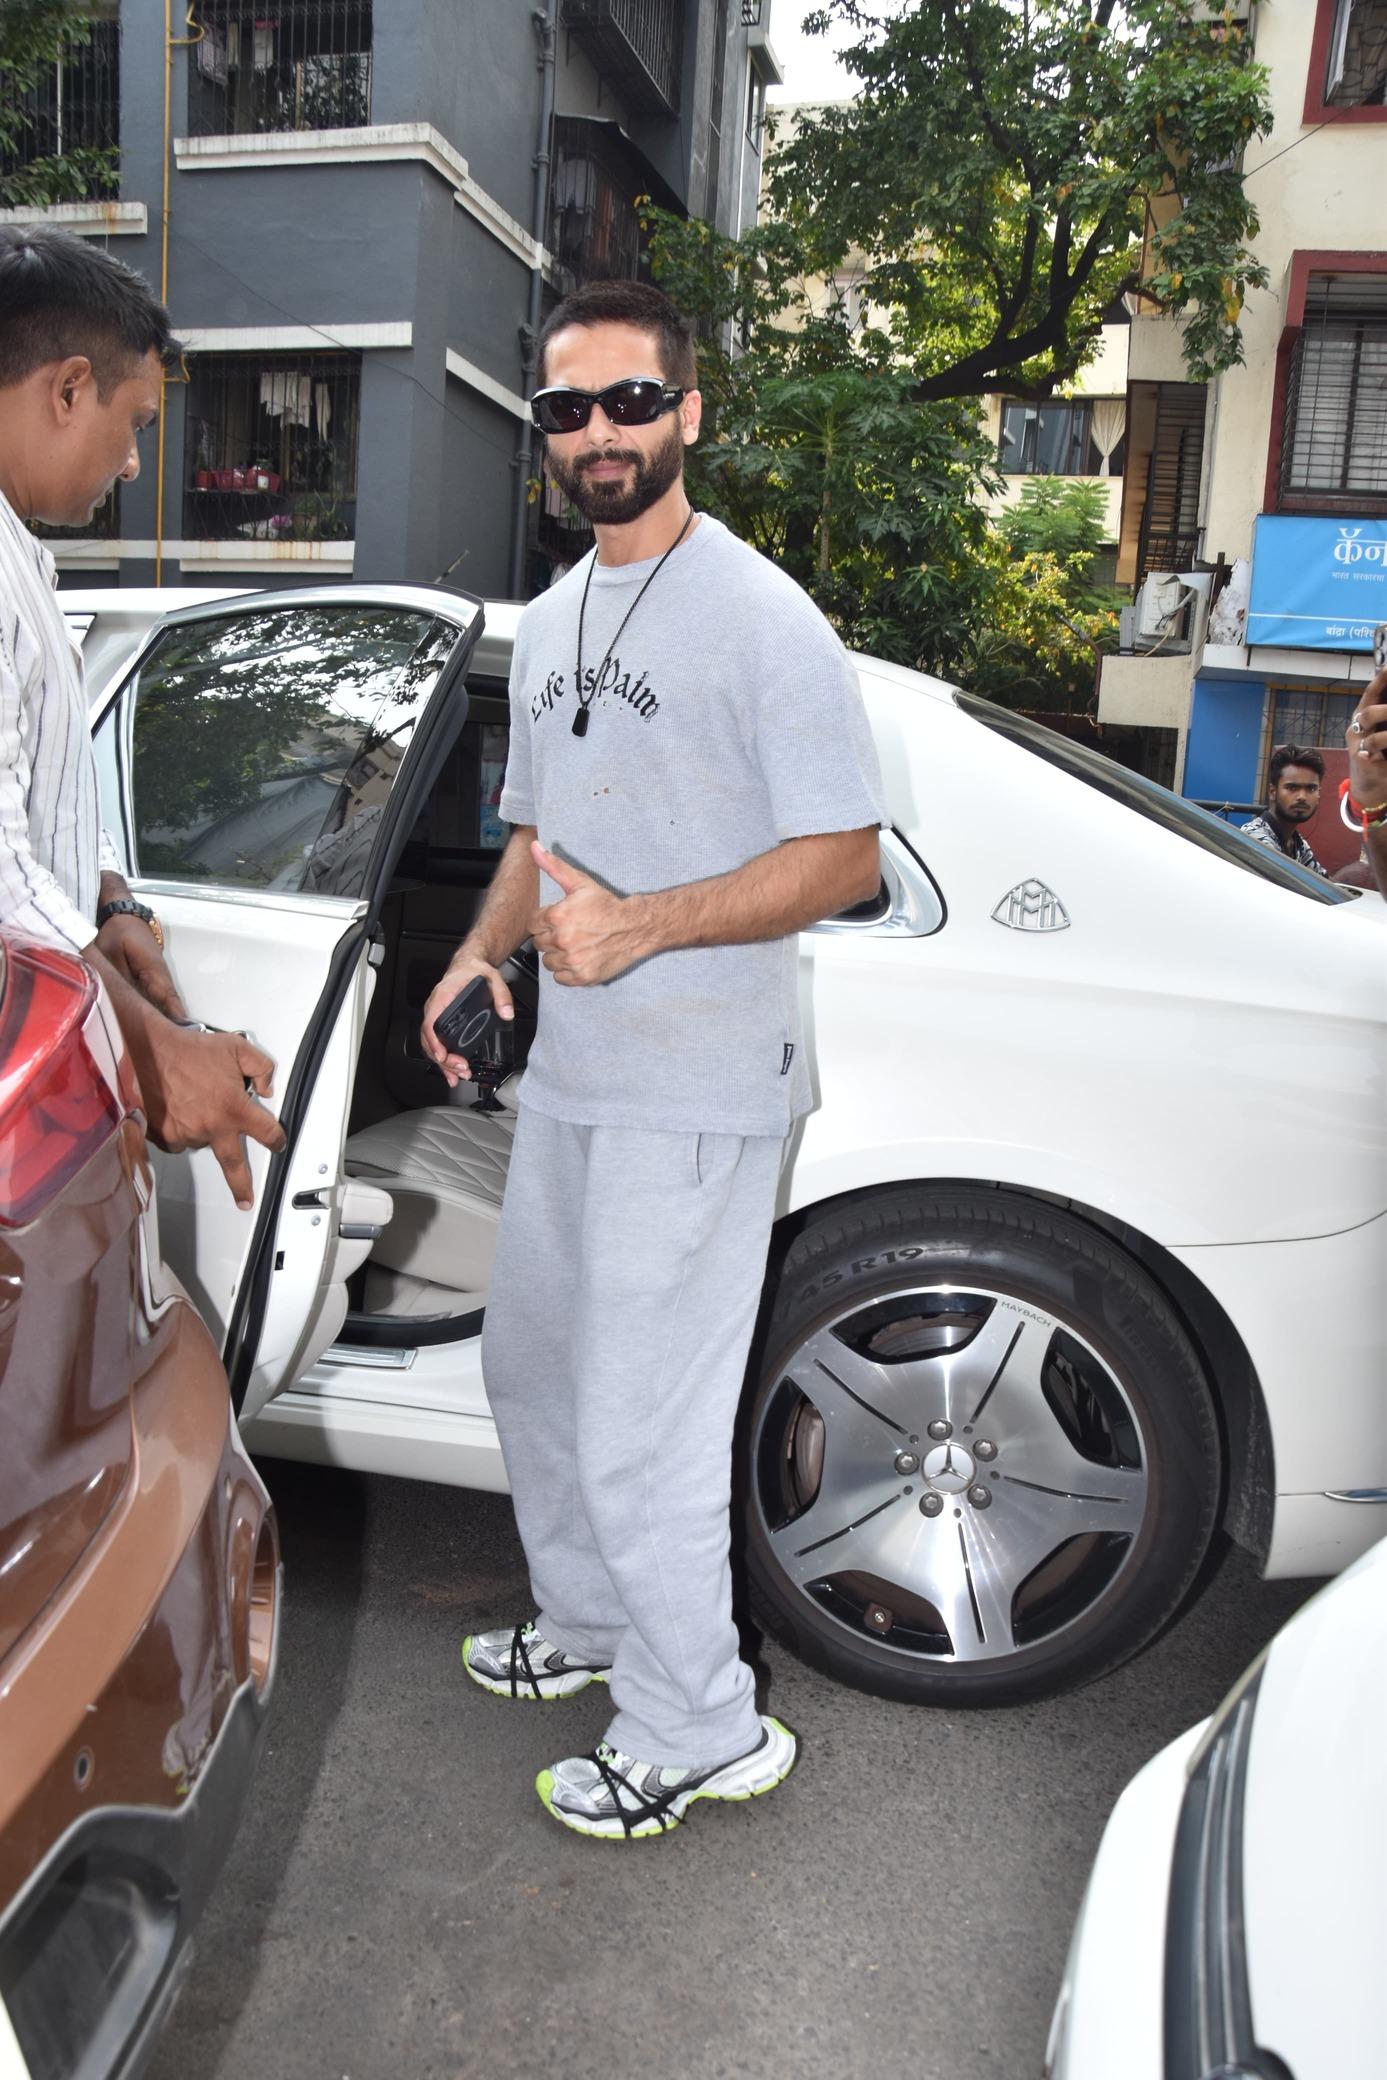 Shahid Kapoor was seen in the city in an all-grey athleisure wear